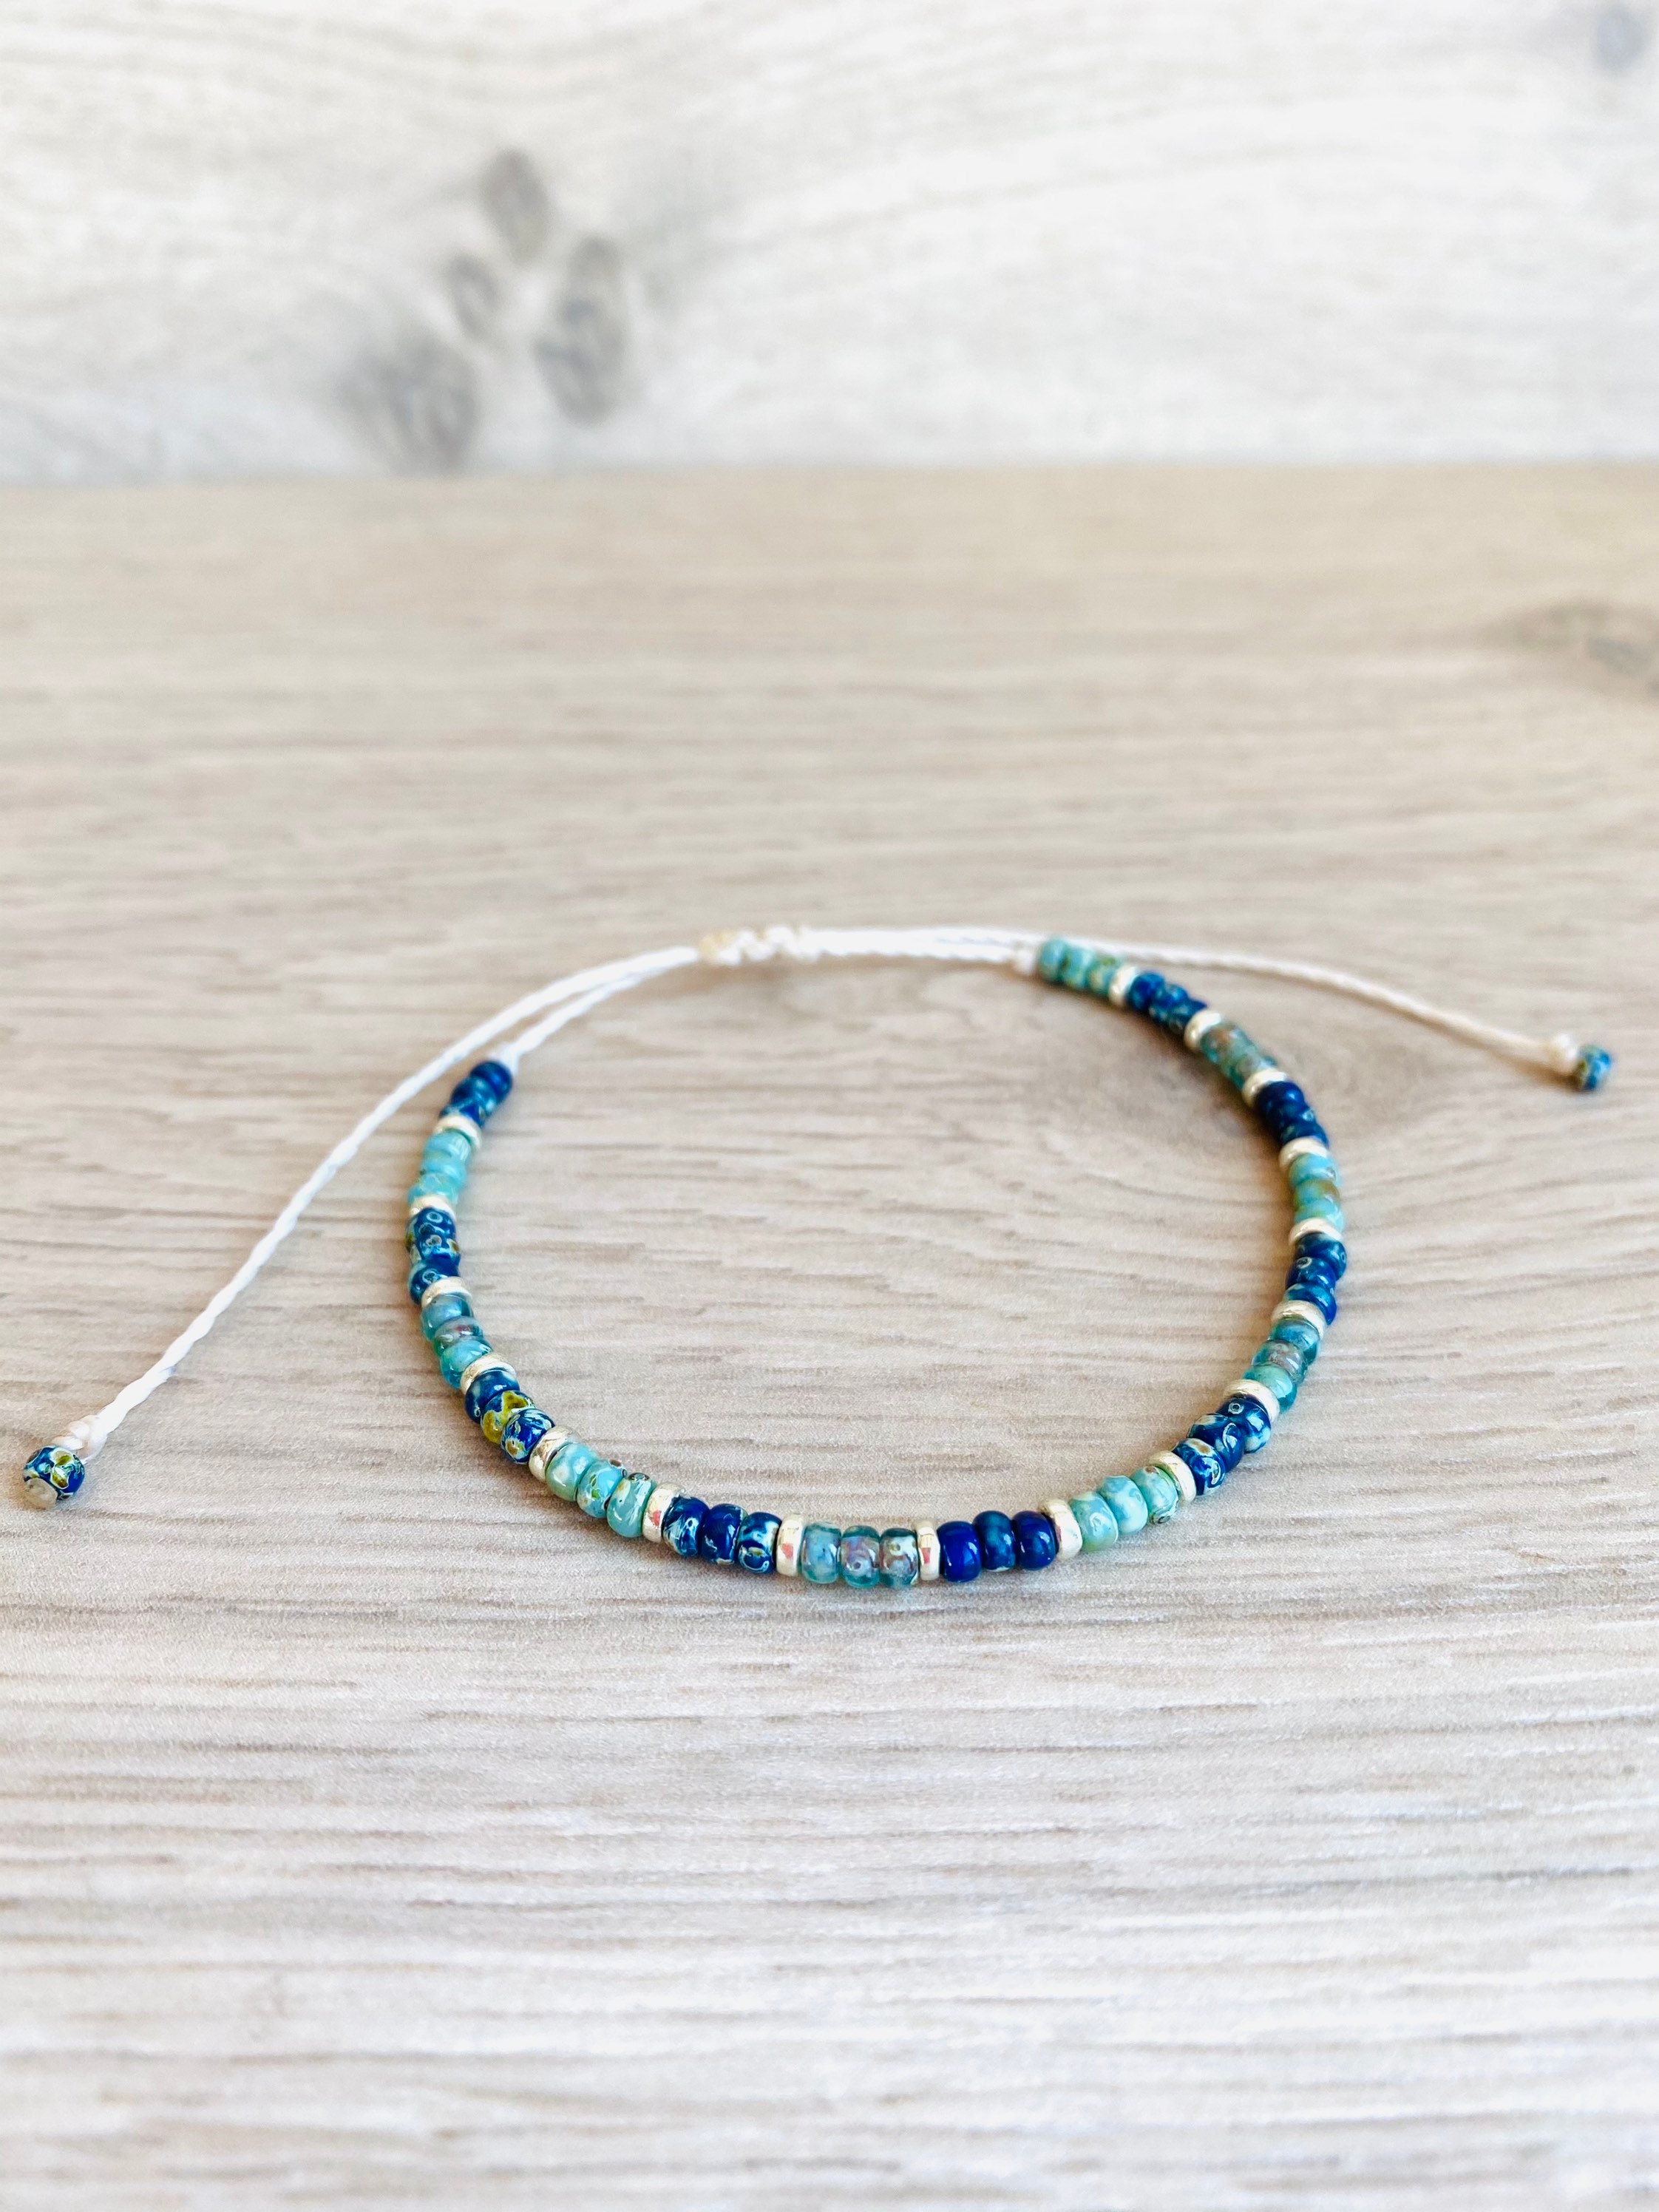 waxed cord summer gift women waterproof adjustable stackable jewelry 1 beaded boho bracelet with turquoise and blue seed beads